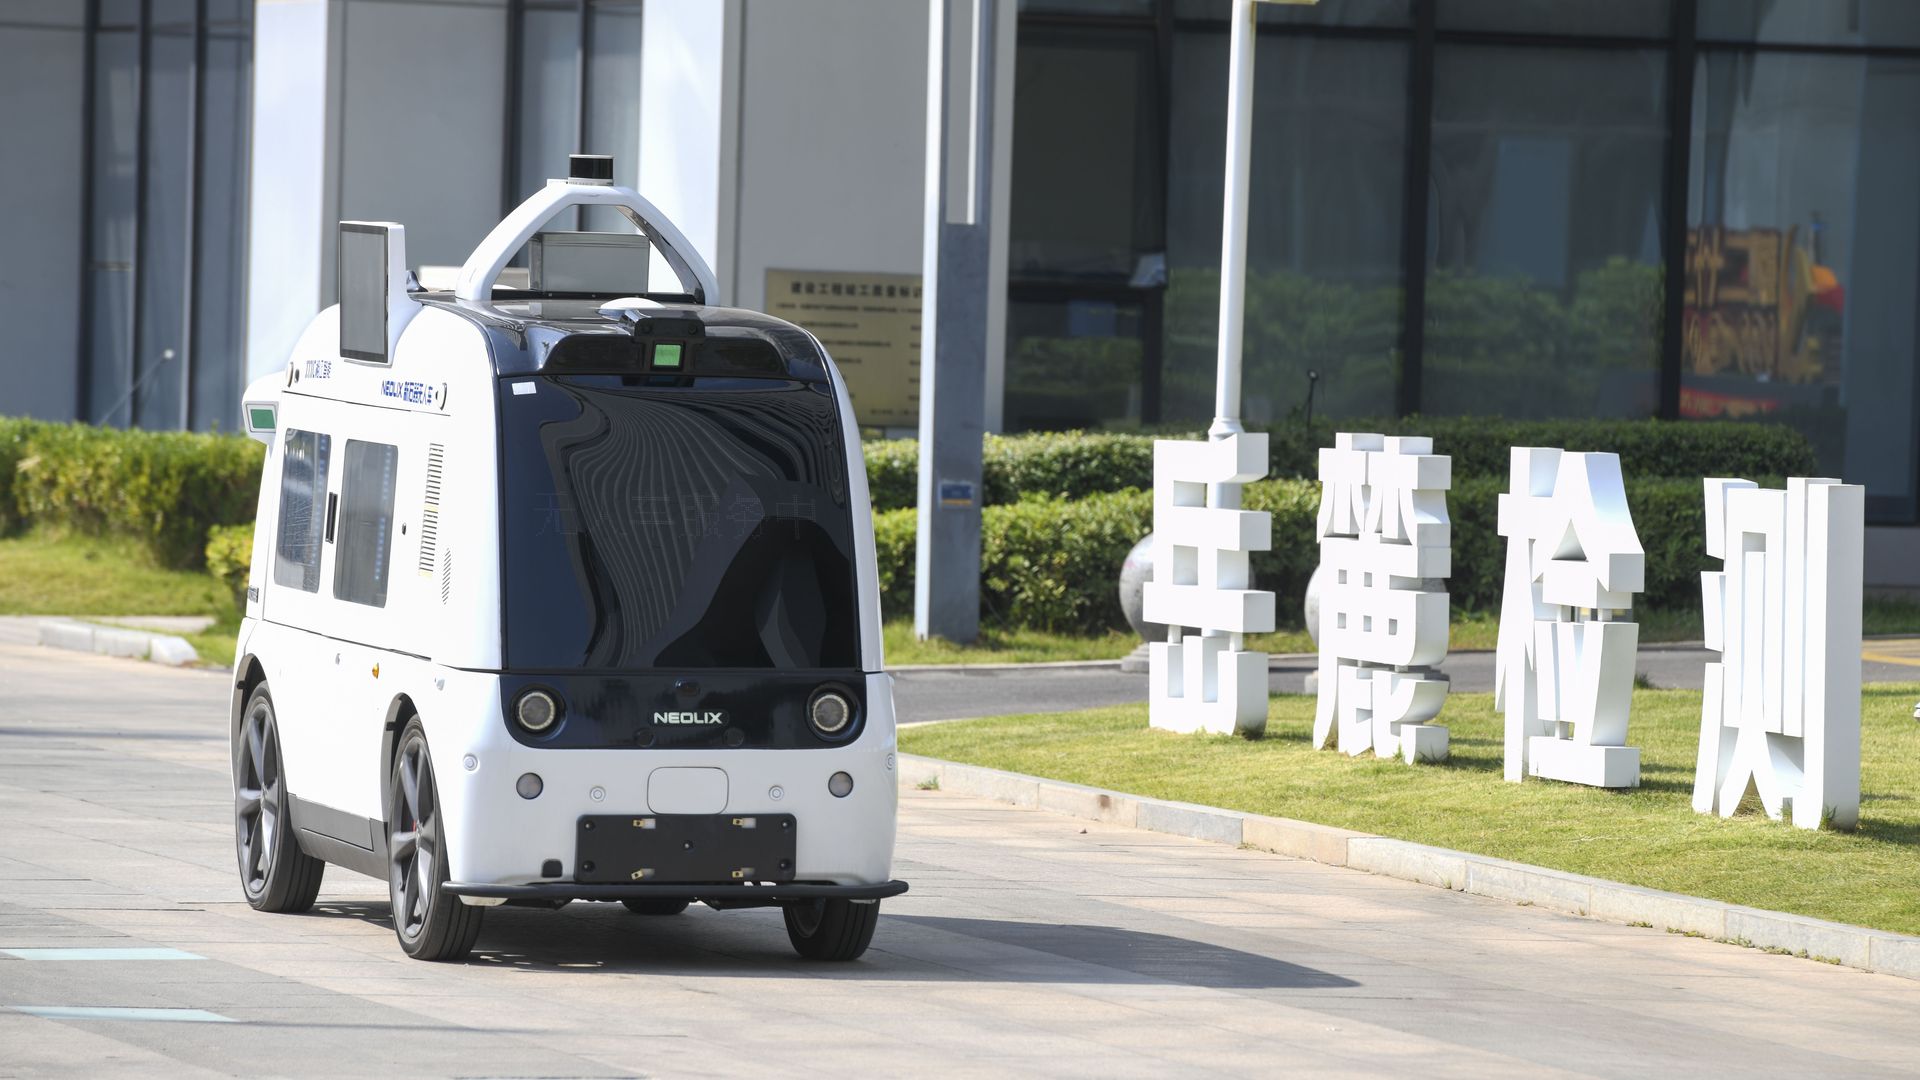 A self-driving vending cart on the street of an office park in China.